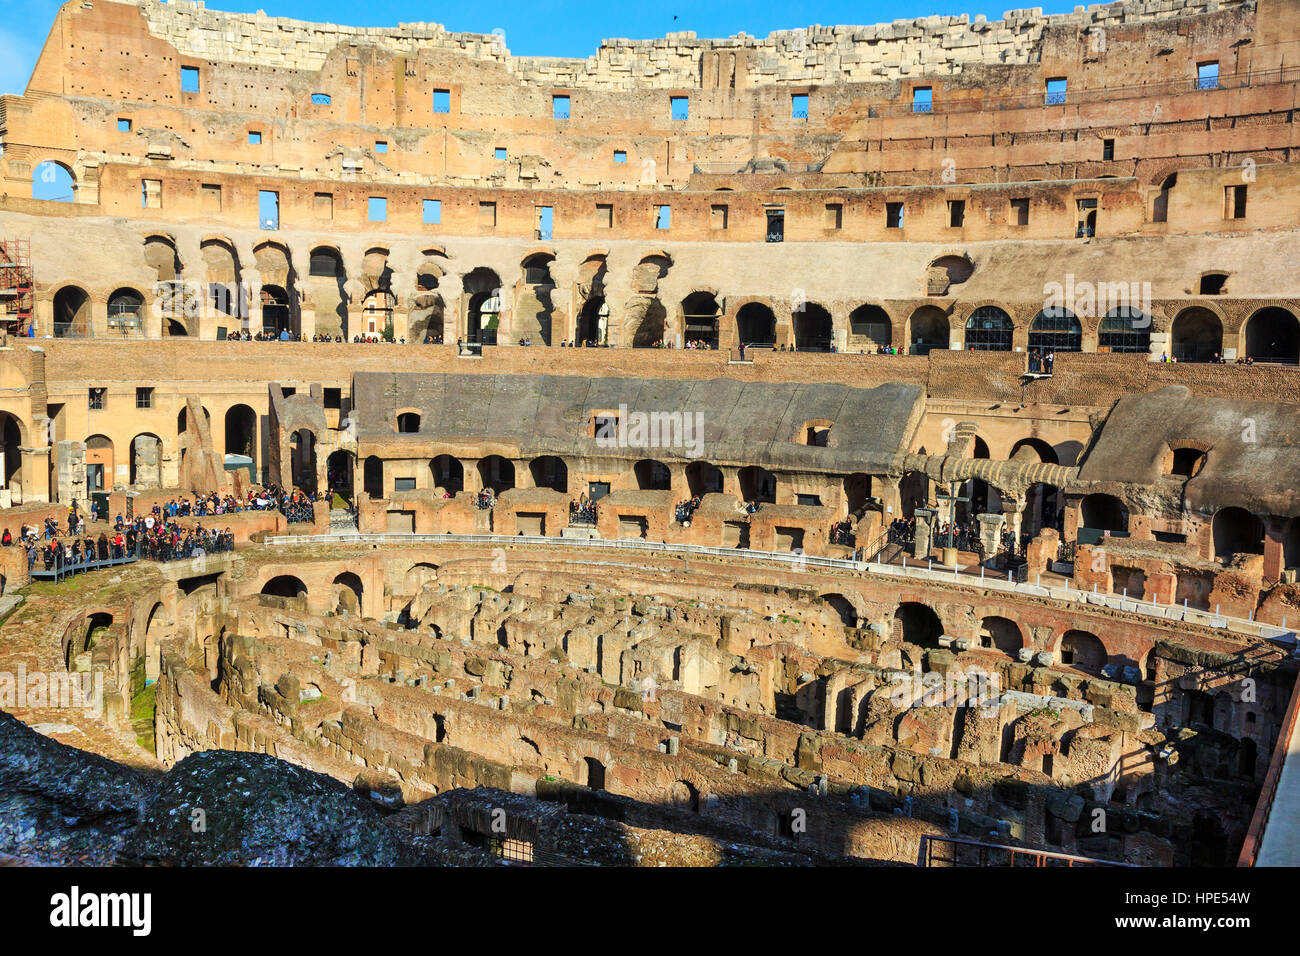 Interior of the 1st century Flaviam amphitheatre known as the Colosseum, Rome, Italy Stock Photo